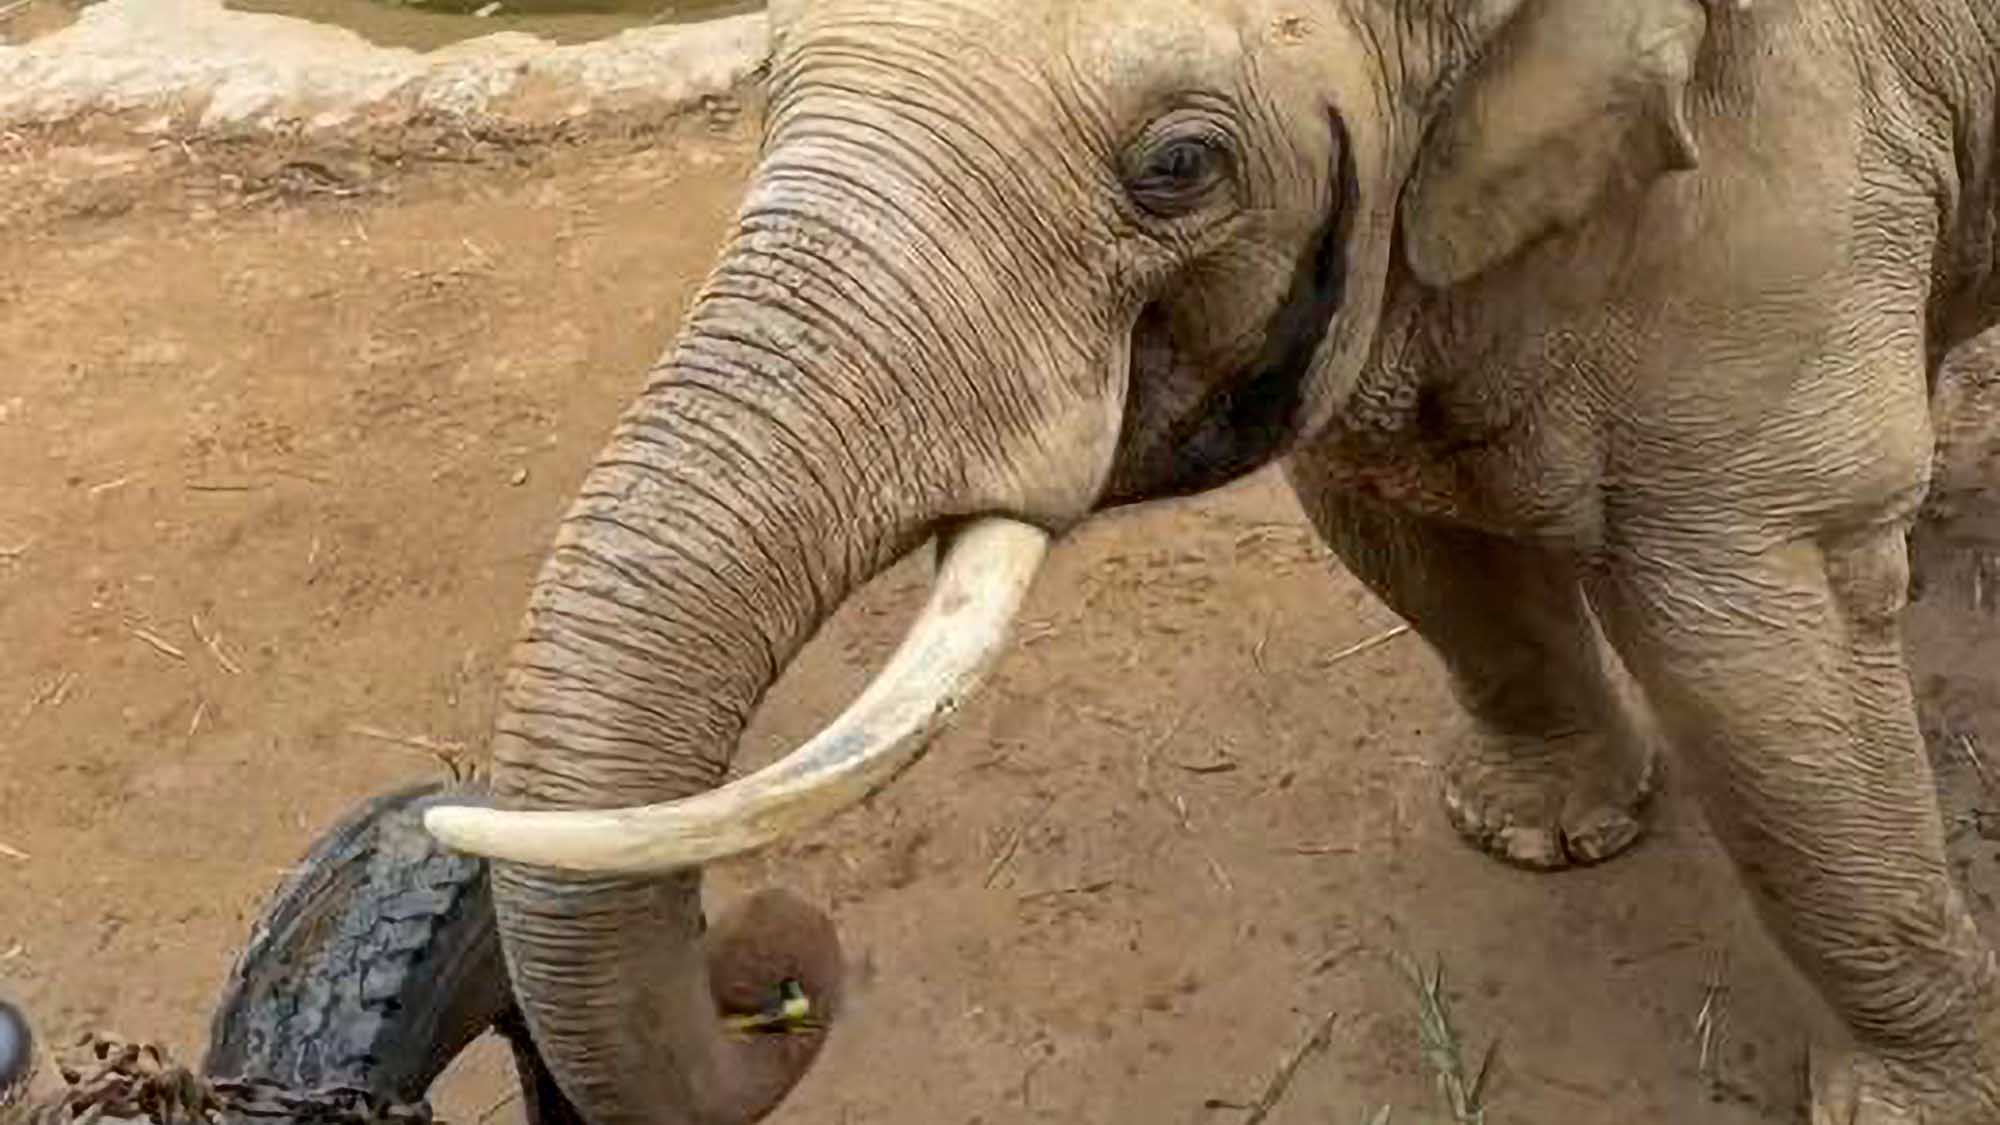 Read more about the article Kind Elephant Returns Child’s Shoe That Fell Into Enclosure